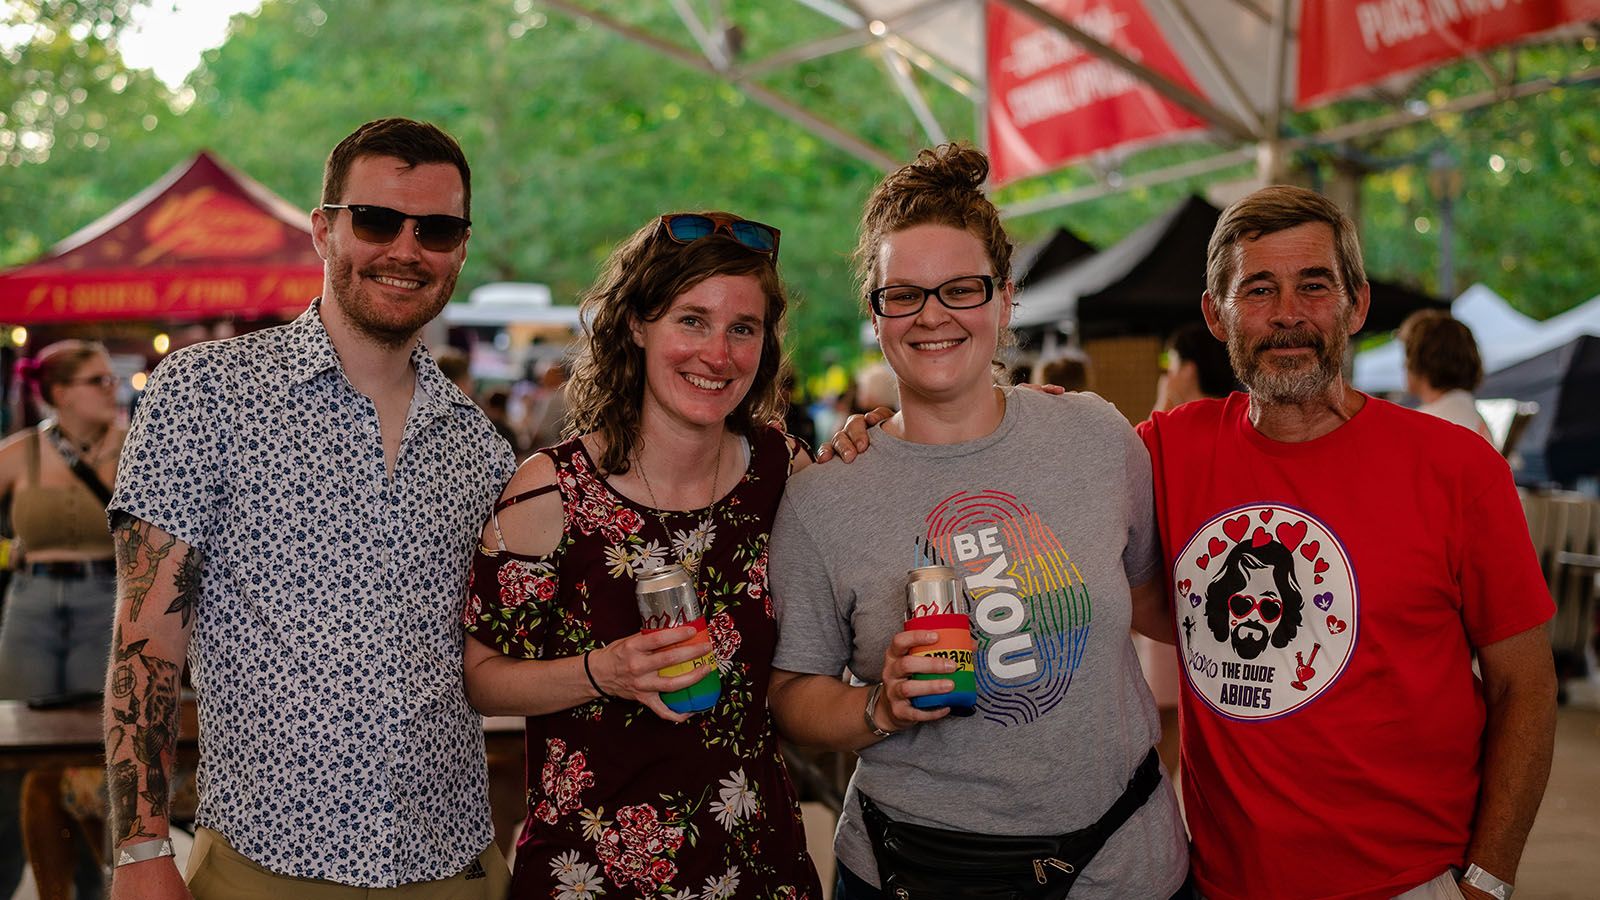 Fort Wayne Pride will be about celebrating who you are on July 26-27 at Headwaters Park.